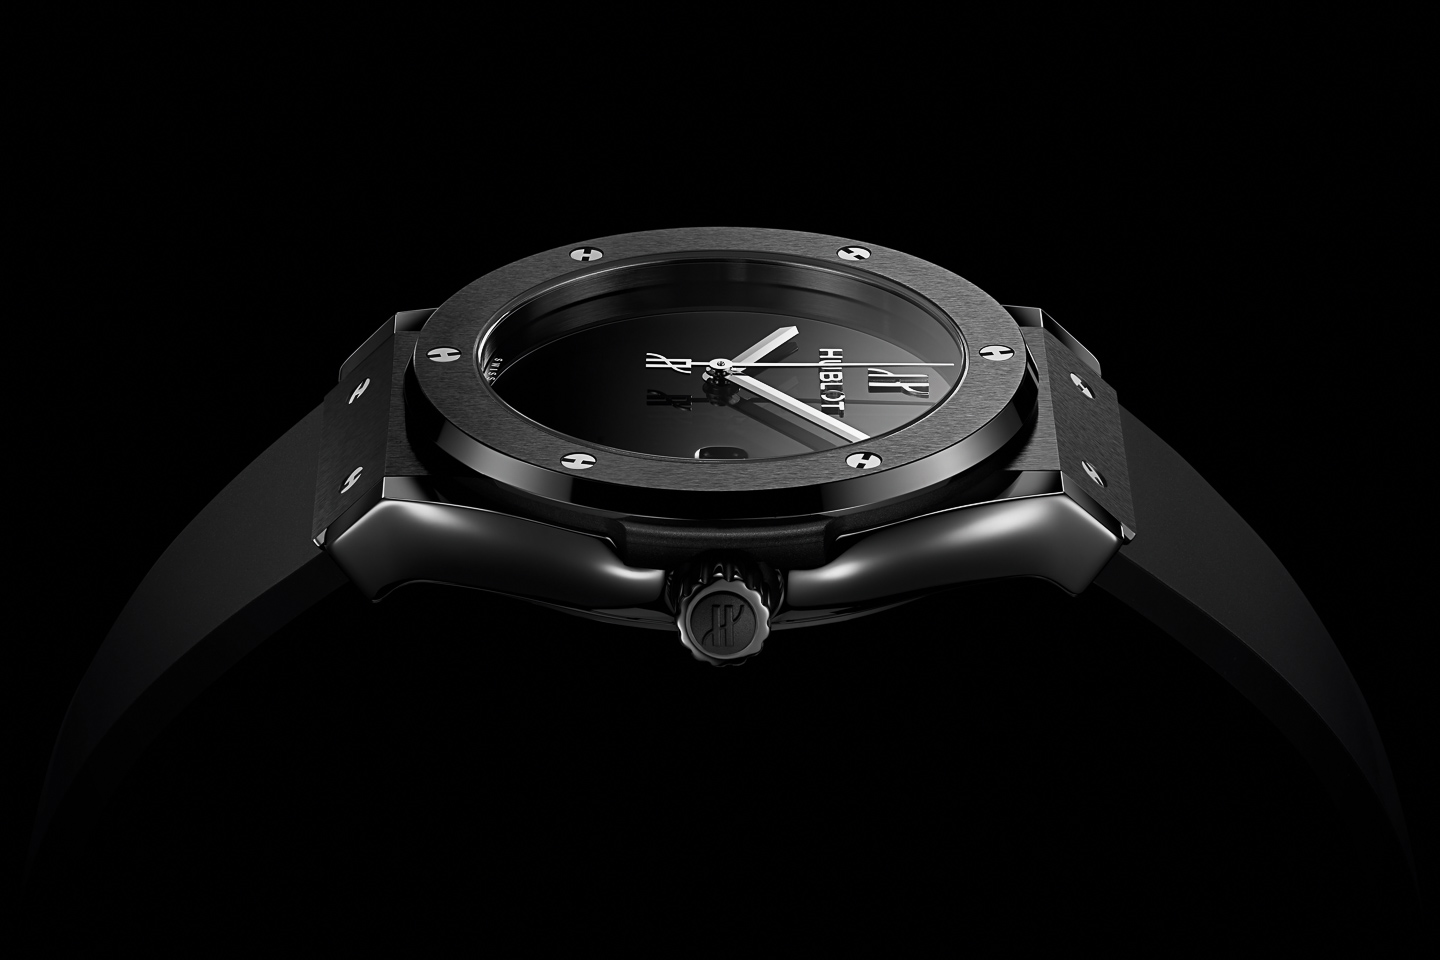 Hublot Celebrates Its 40th Birthday With The Super-Limited New Classic Fusion XL Watch Releases 